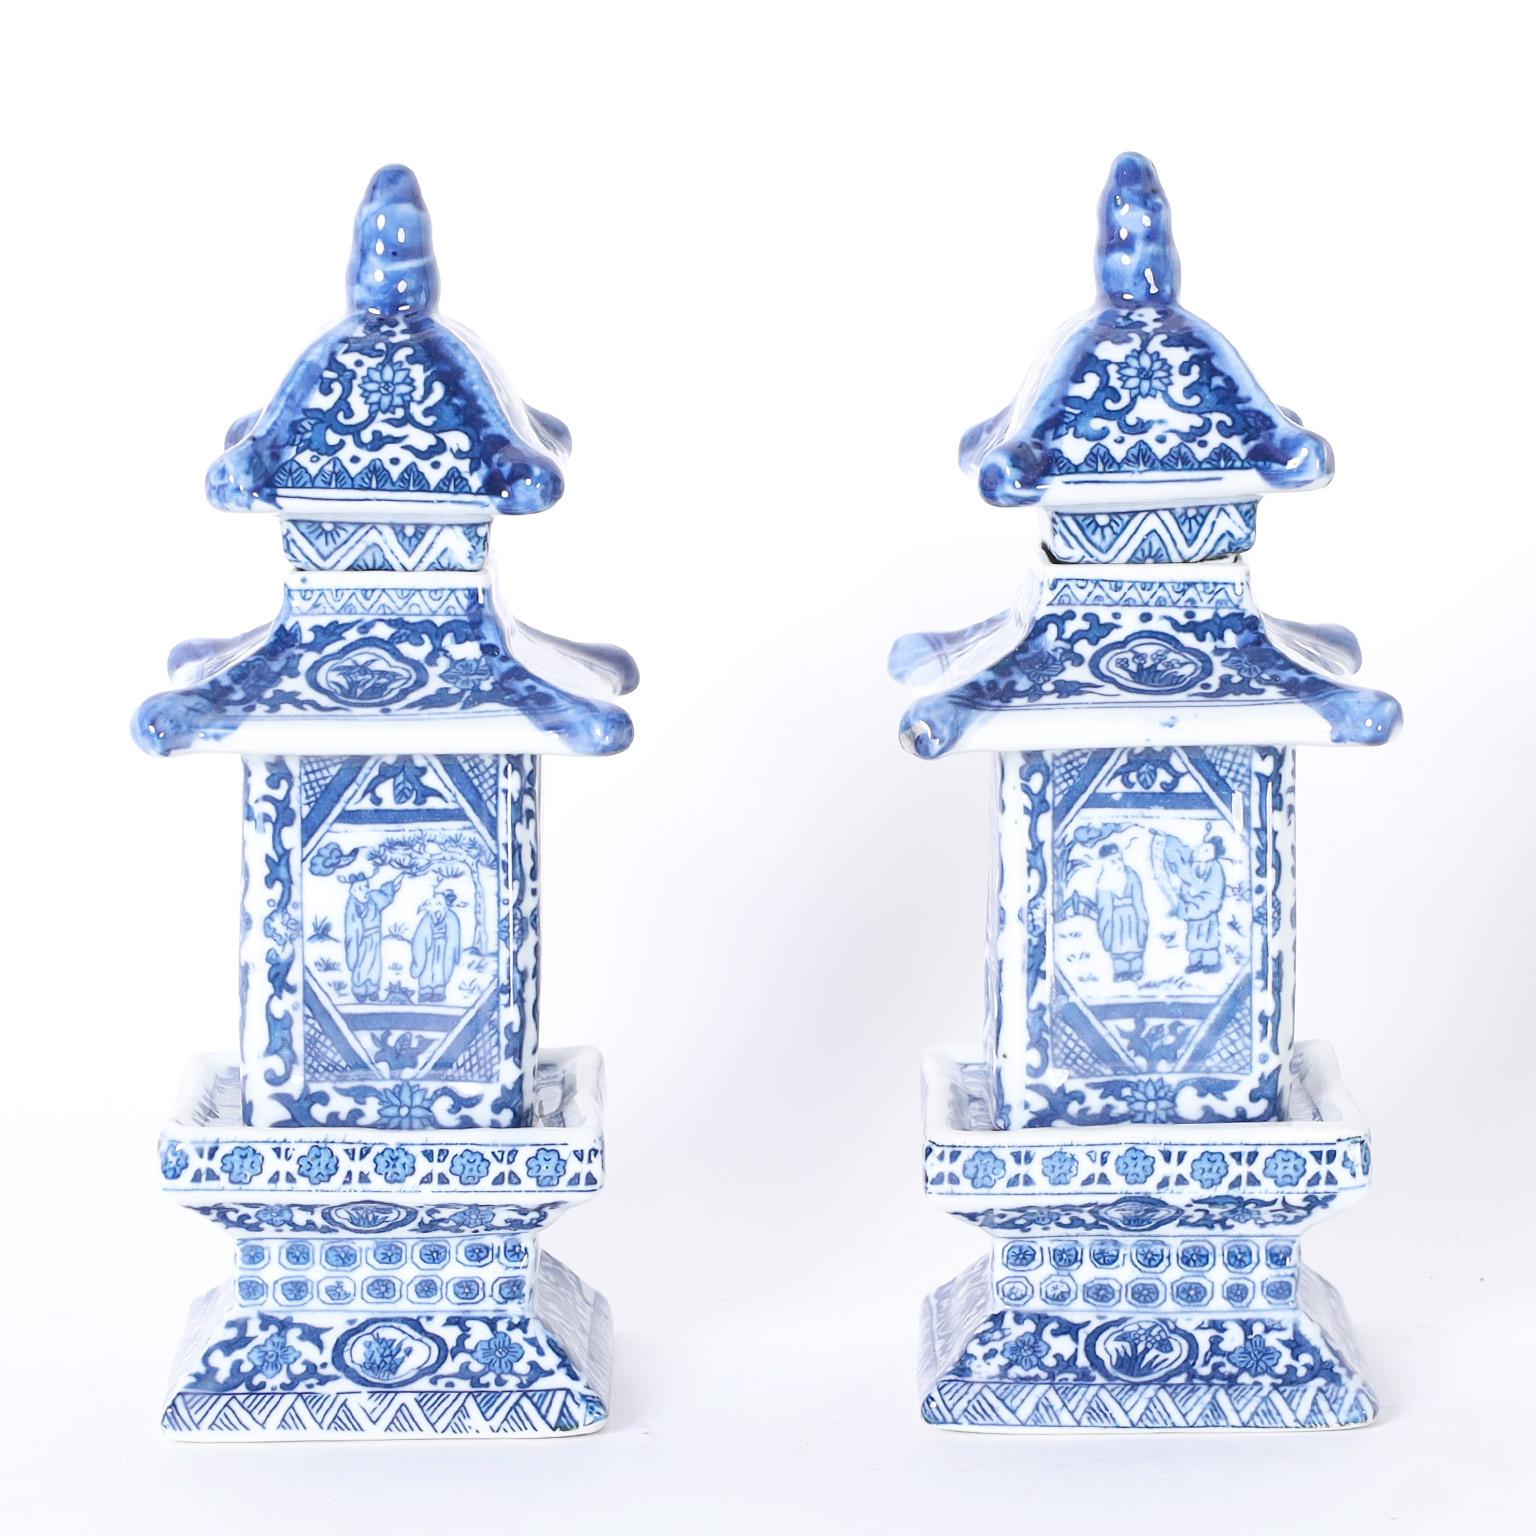 Pair of petite Chinese blue and white porcelain canisters or caddies with an elegant pagoda form hand decorated with floral and geometric designs around center panels with figures.